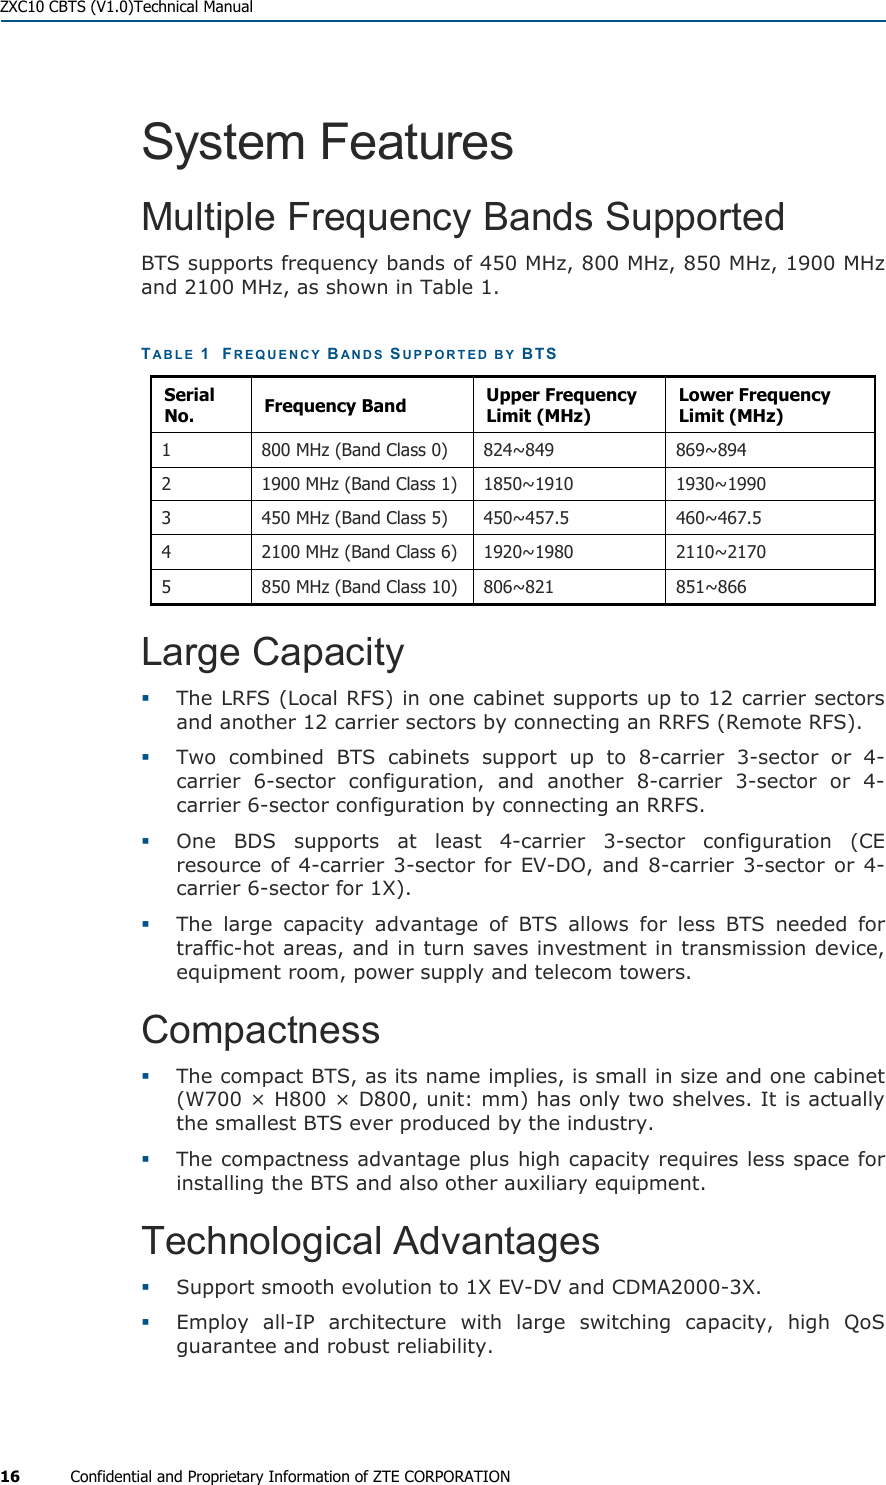  ZXC10 CBTS (V1.0)Technical Manual 16  Confidential and Proprietary Information of ZTE CORPORATION System Features Multiple Frequency Bands Supported BTS supports frequency bands of 450 MHz, 800 MHz, 850 MHz, 1900 MHz and 2100 MHz, as shown in Table 1. TABLE 1  FREQUENCY BANDS SUPPORTED BY BTS Serial No.  Frequency Band  Upper Frequency Limit (MHz) Lower Frequency Limit (MHz) 1  800 MHz (Band Class 0)  824~849  869~894 2  1900 MHz (Band Class 1)  1850~1910  1930~1990 3  450 MHz (Band Class 5)  450~457.5  460~467.5 4  2100 MHz (Band Class 6)  1920~1980  2110~2170 5  850 MHz (Band Class 10)  806~821  851~866 Large Capacity   The LRFS (Local RFS) in one cabinet supports up to 12 carrier sectors and another 12 carrier sectors by connecting an RRFS (Remote RFS).    Two combined BTS cabinets support up to 8-carrier 3-sector or 4-carrier 6-sector configuration, and another 8-carrier 3-sector or 4-carrier 6-sector configuration by connecting an RRFS.    One BDS supports at least 4-carrier 3-sector configuration (CE resource of 4-carrier 3-sector for EV-DO, and 8-carrier 3-sector or 4-carrier 6-sector for 1X).    The large capacity advantage of BTS allows for less BTS needed for traffic-hot areas, and in turn saves investment in transmission device, equipment room, power supply and telecom towers. Compactness   The compact BTS, as its name implies, is small in size and one cabinet (W700 × H800 × D800, unit: mm) has only two shelves. It is actually the smallest BTS ever produced by the industry.    The compactness advantage plus high capacity requires less space for installing the BTS and also other auxiliary equipment. Technological Advantages   Support smooth evolution to 1X EV-DV and CDMA2000-3X.   Employ all-IP architecture with large switching capacity, high QoS guarantee and robust reliability. 